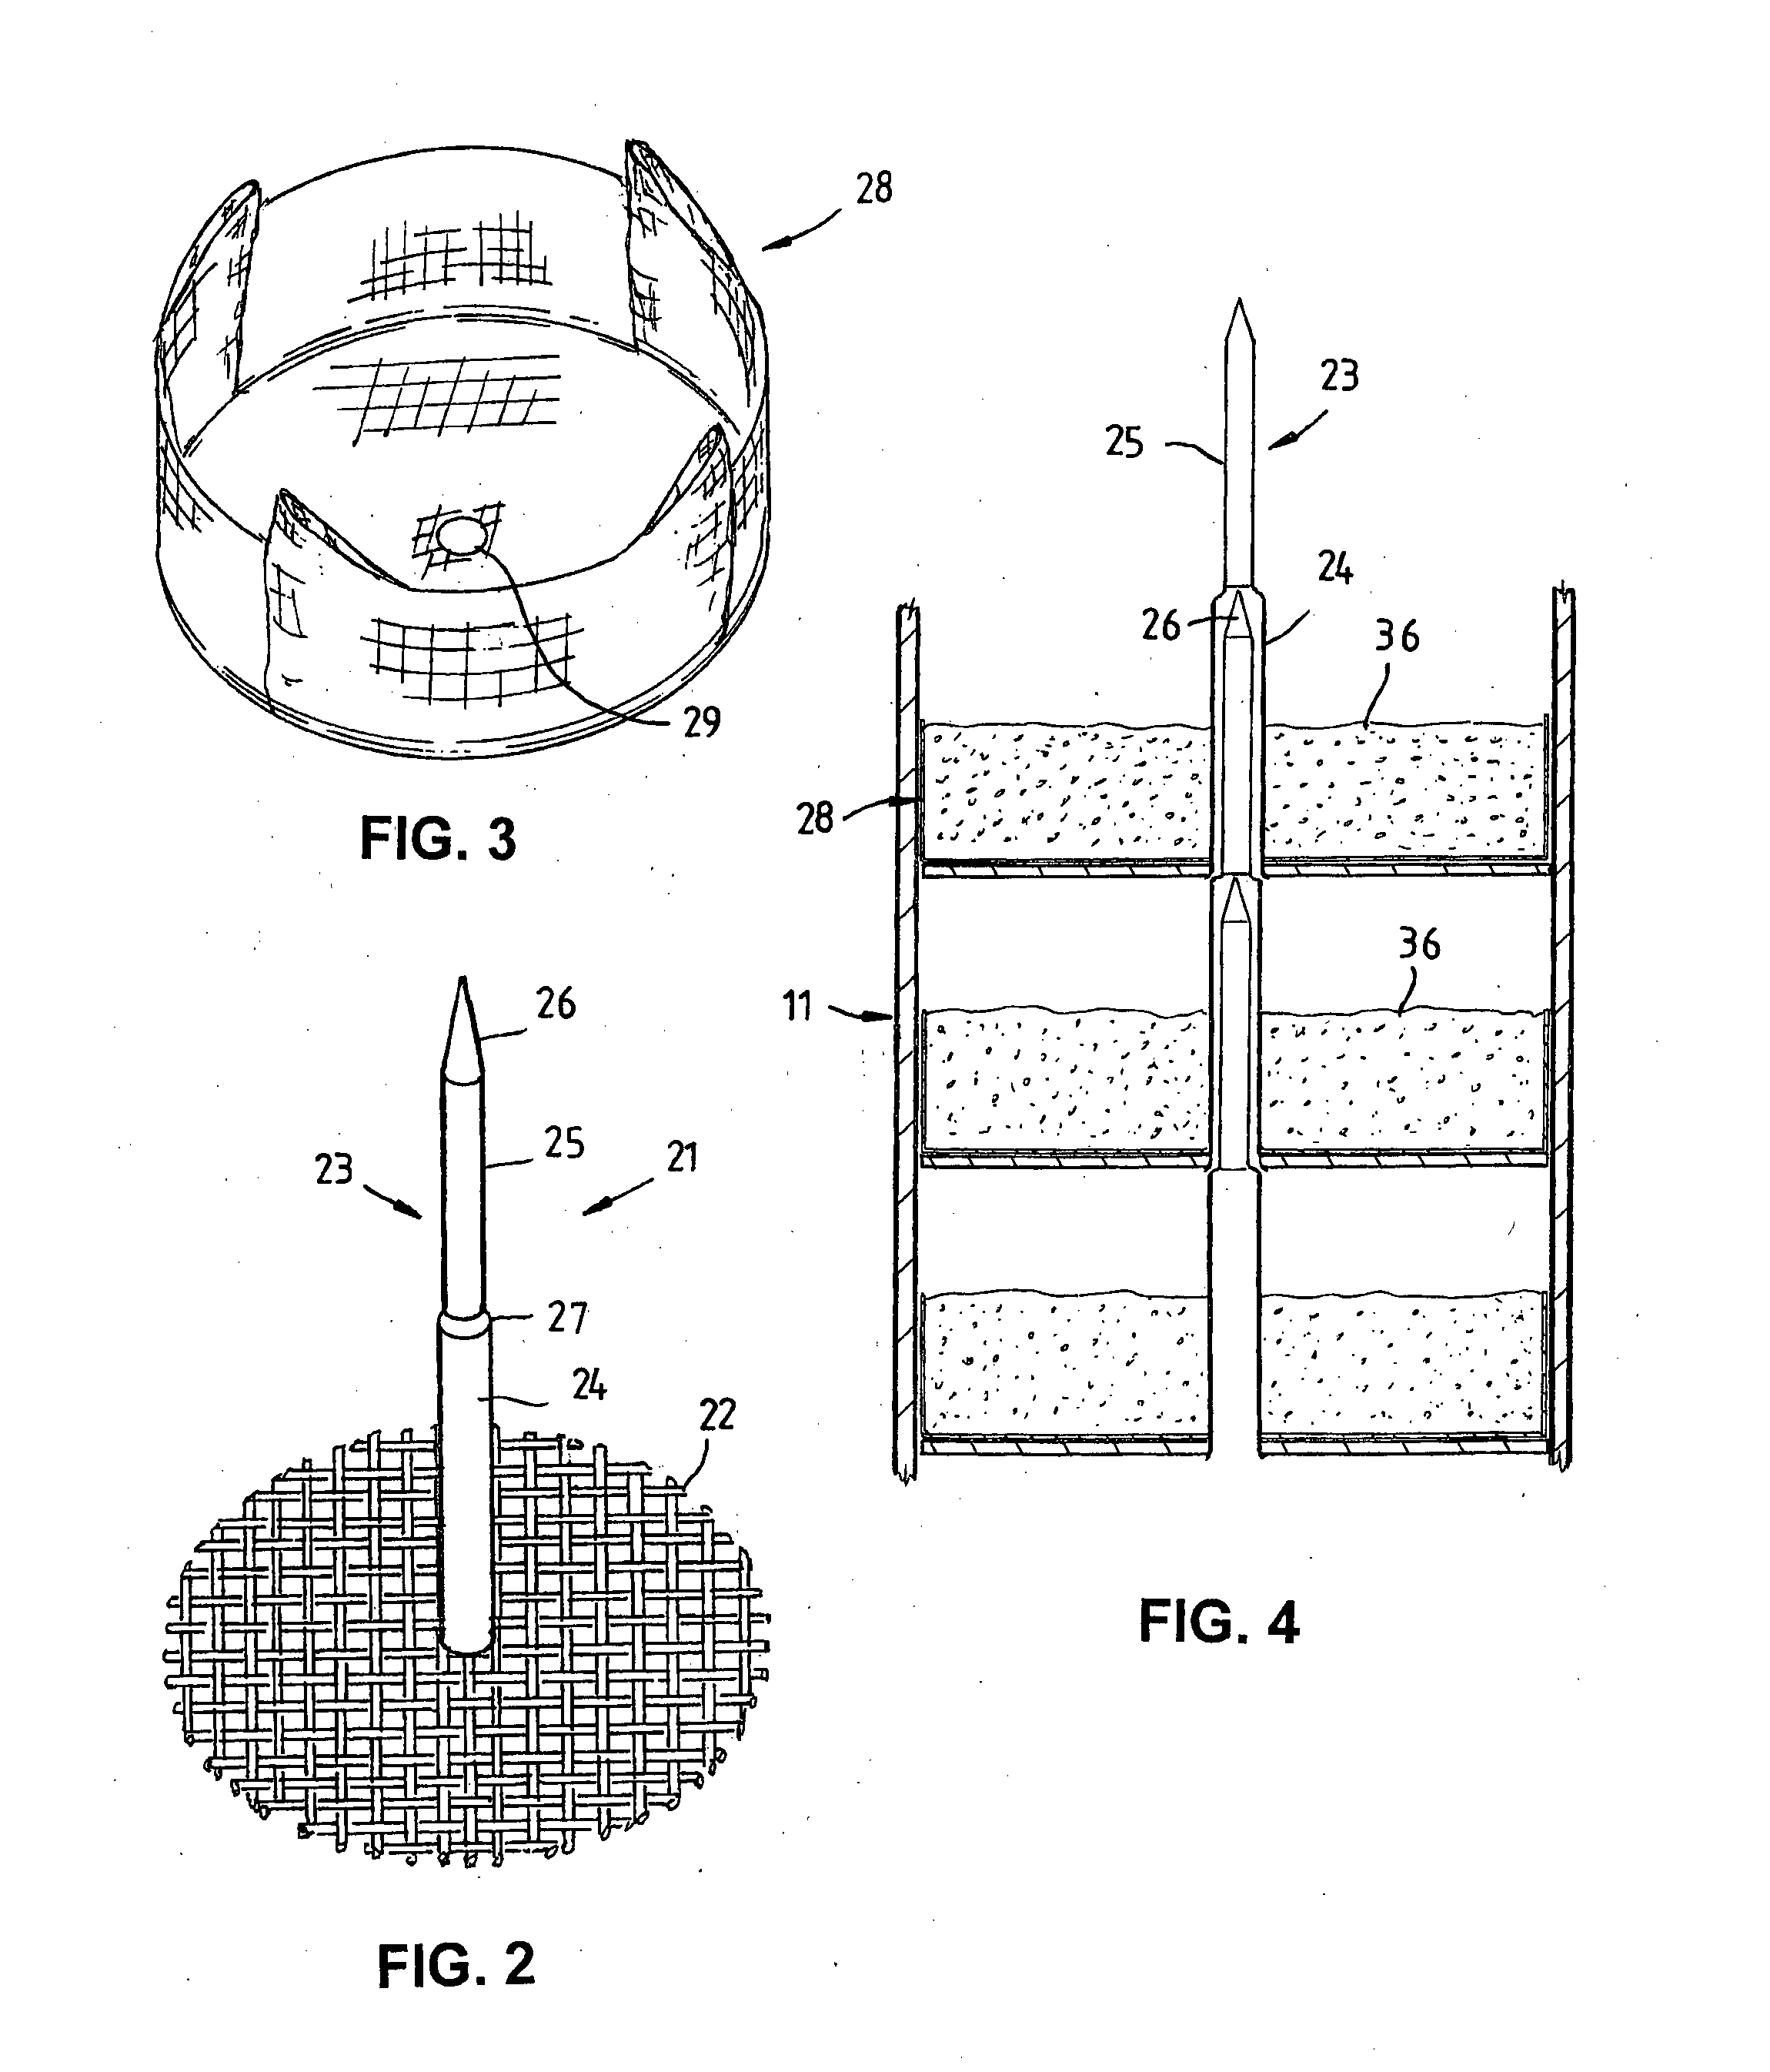 Method of and apparatus for determining the carbon content of soils